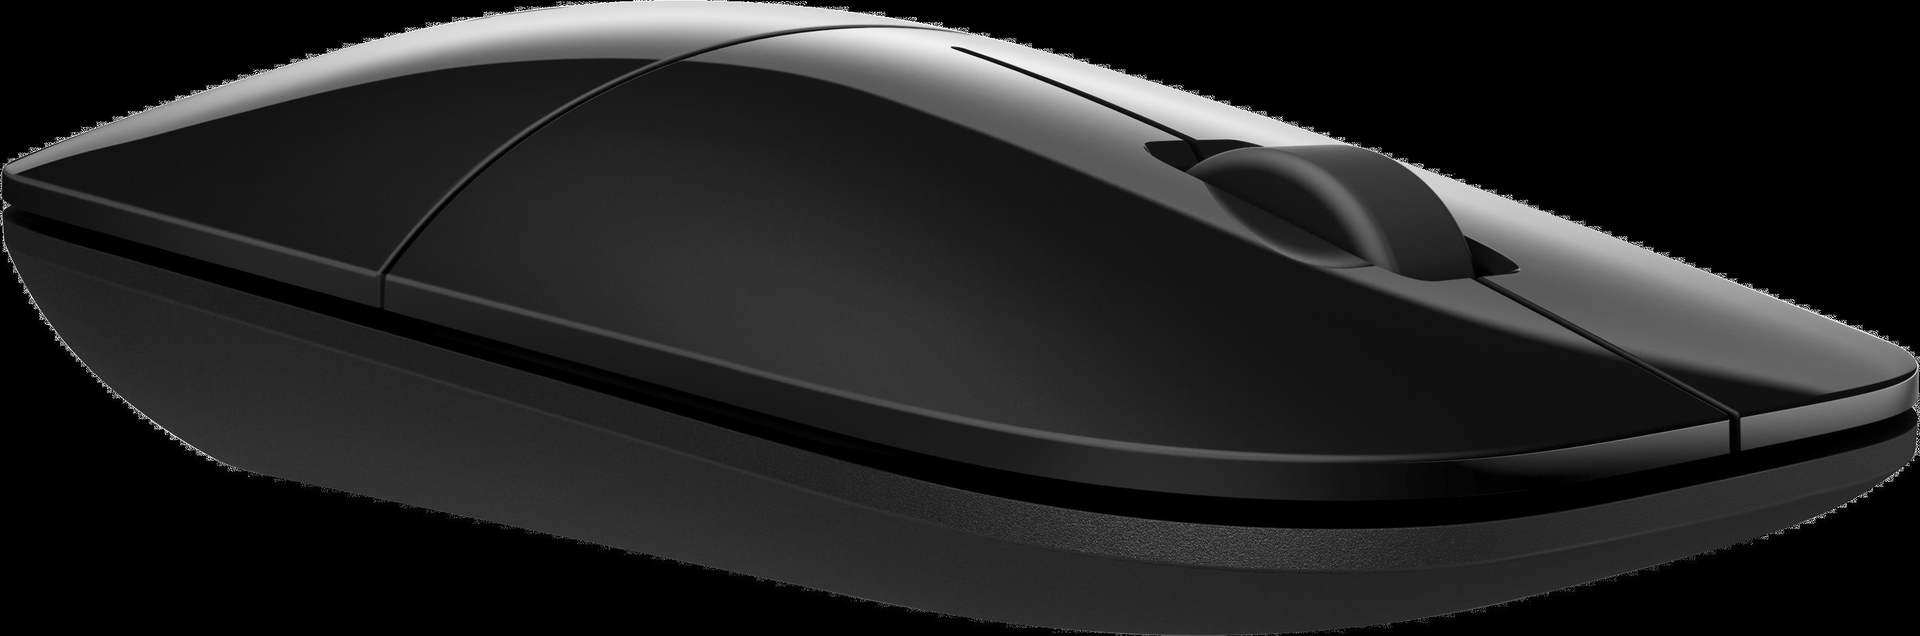 HP Inc. Z3700 BLACK WIRELESS V0L79AA#ABB ENGLISH MOUSE EUROPE- IN LOCALIZATION